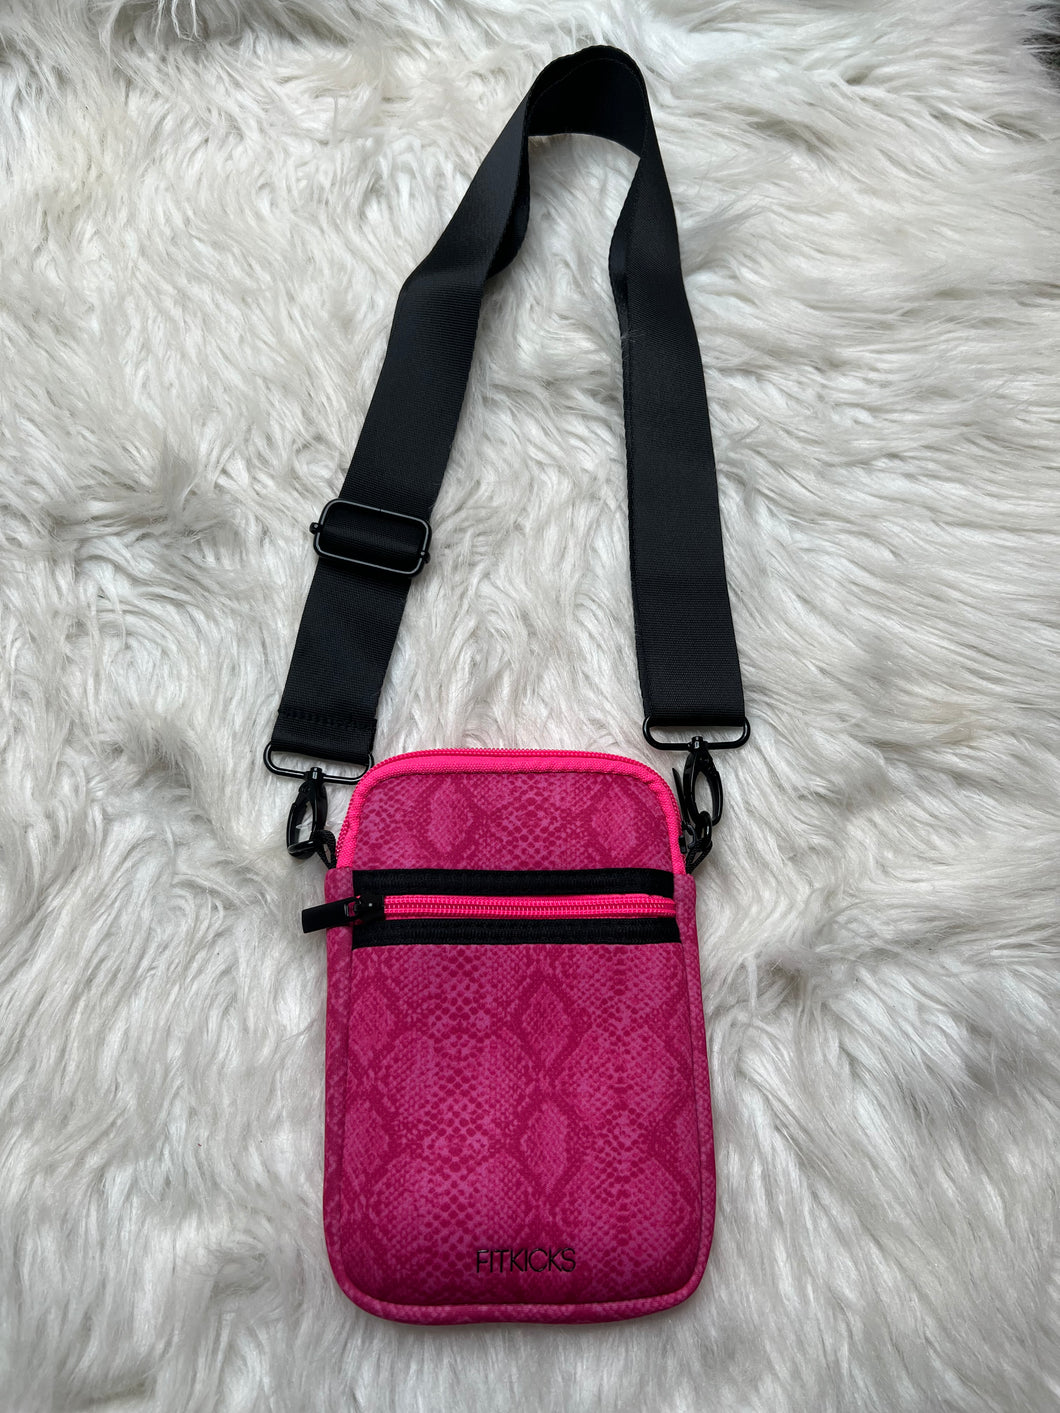 FitKicks Crossover Active Lifestyle Crossbody - Athena's Fashion Boutique